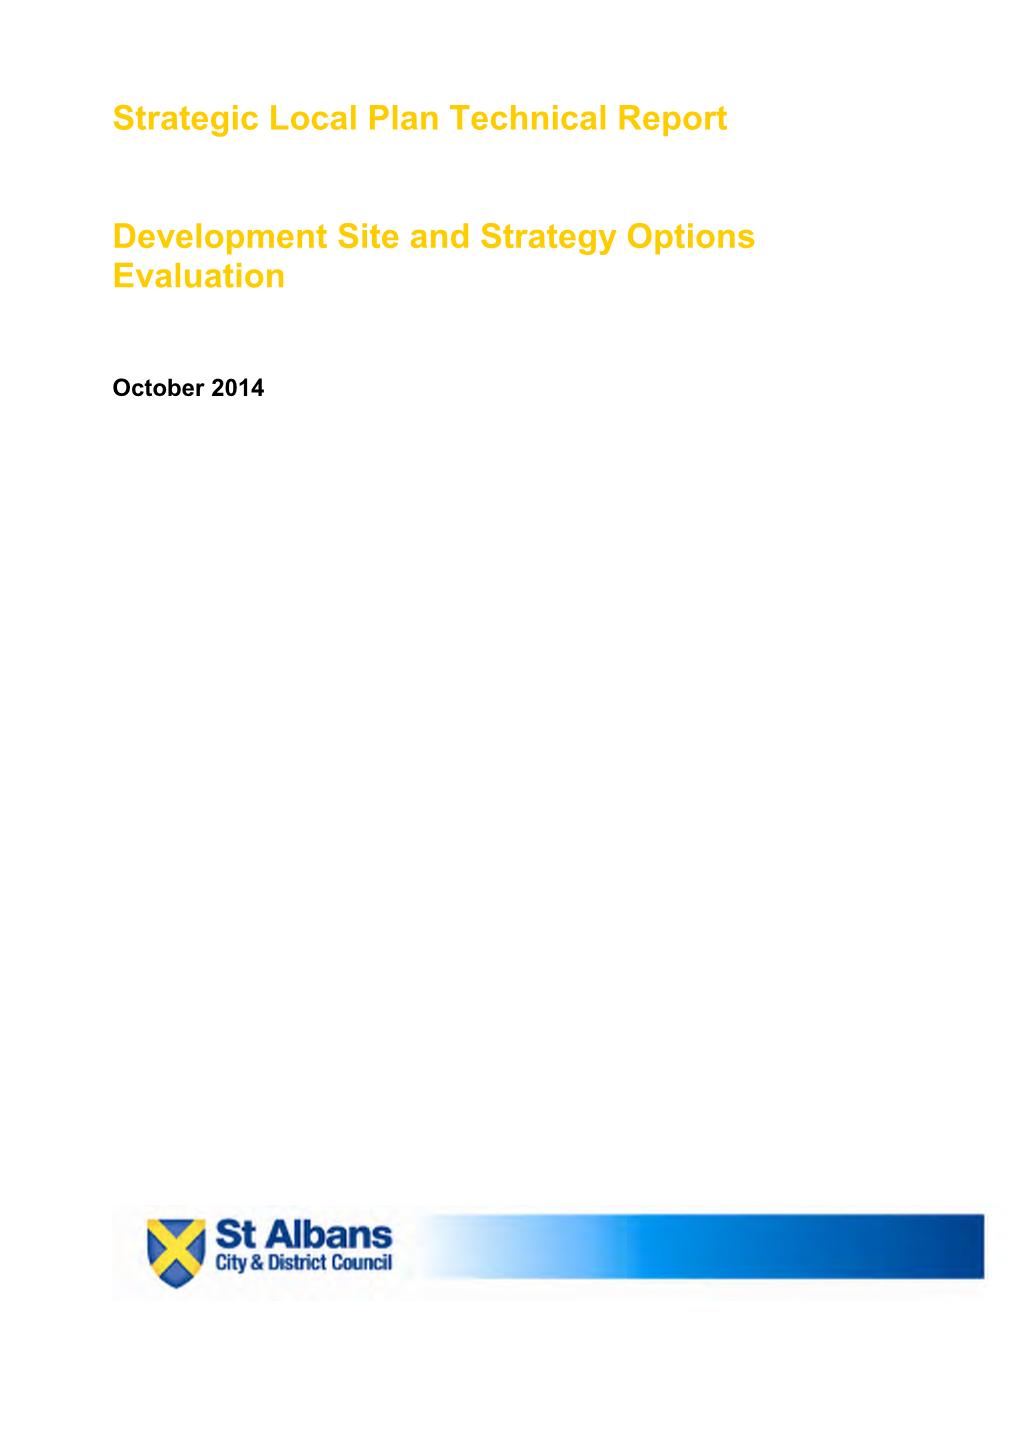 Strategic Local Plan Technical Report Development Site and Strategy